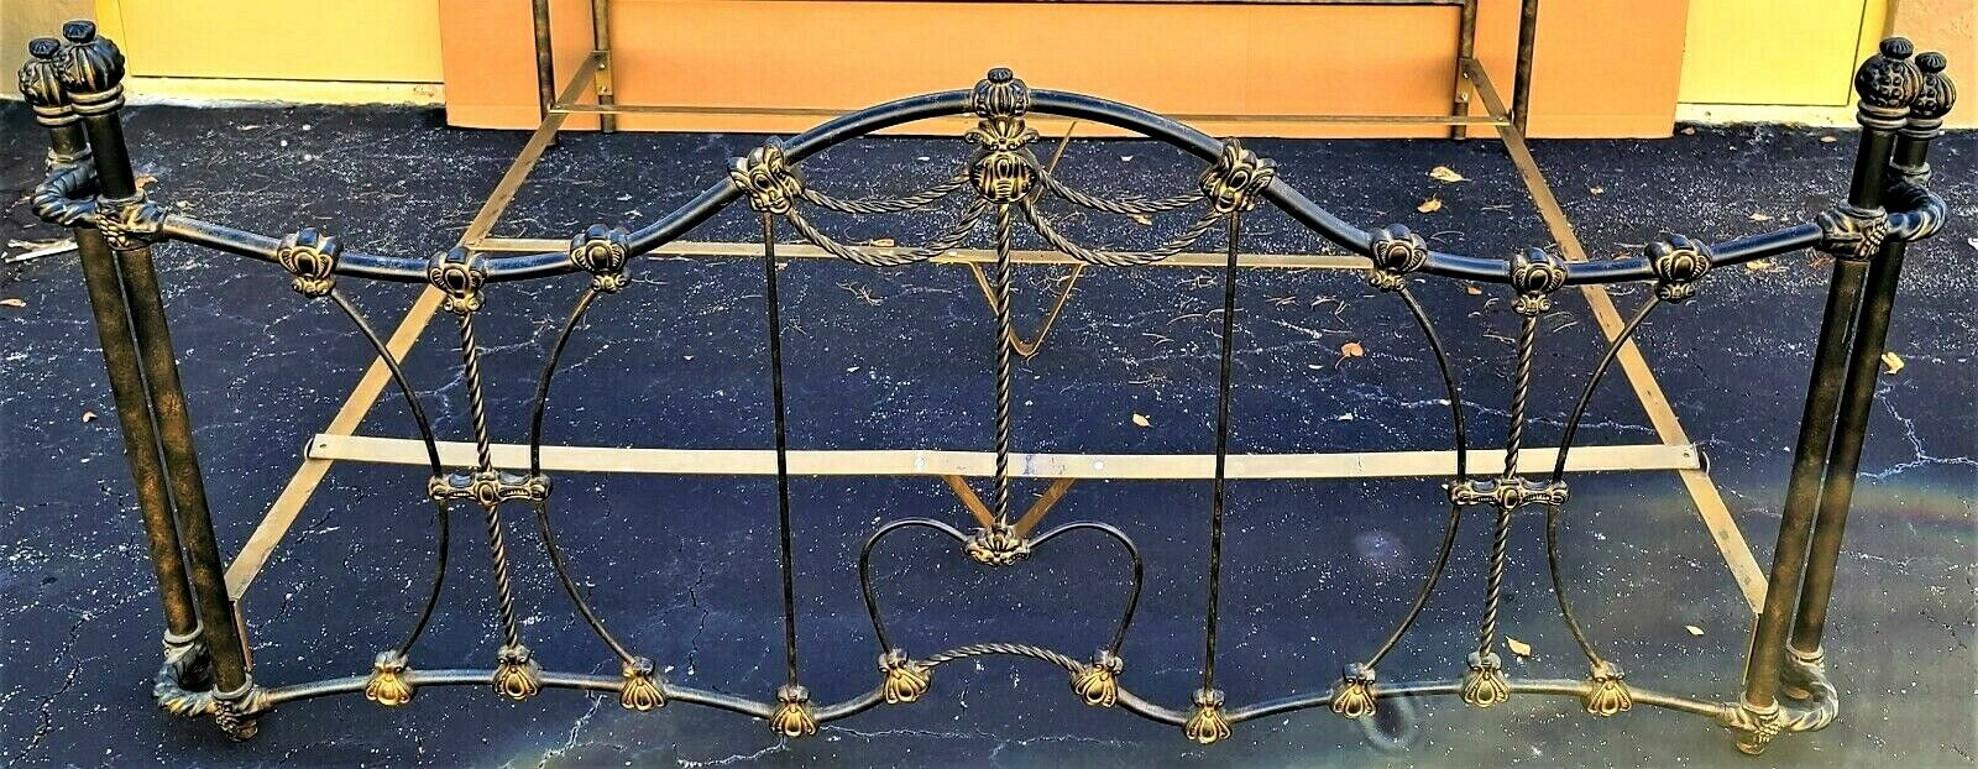 used king bed frame for sale